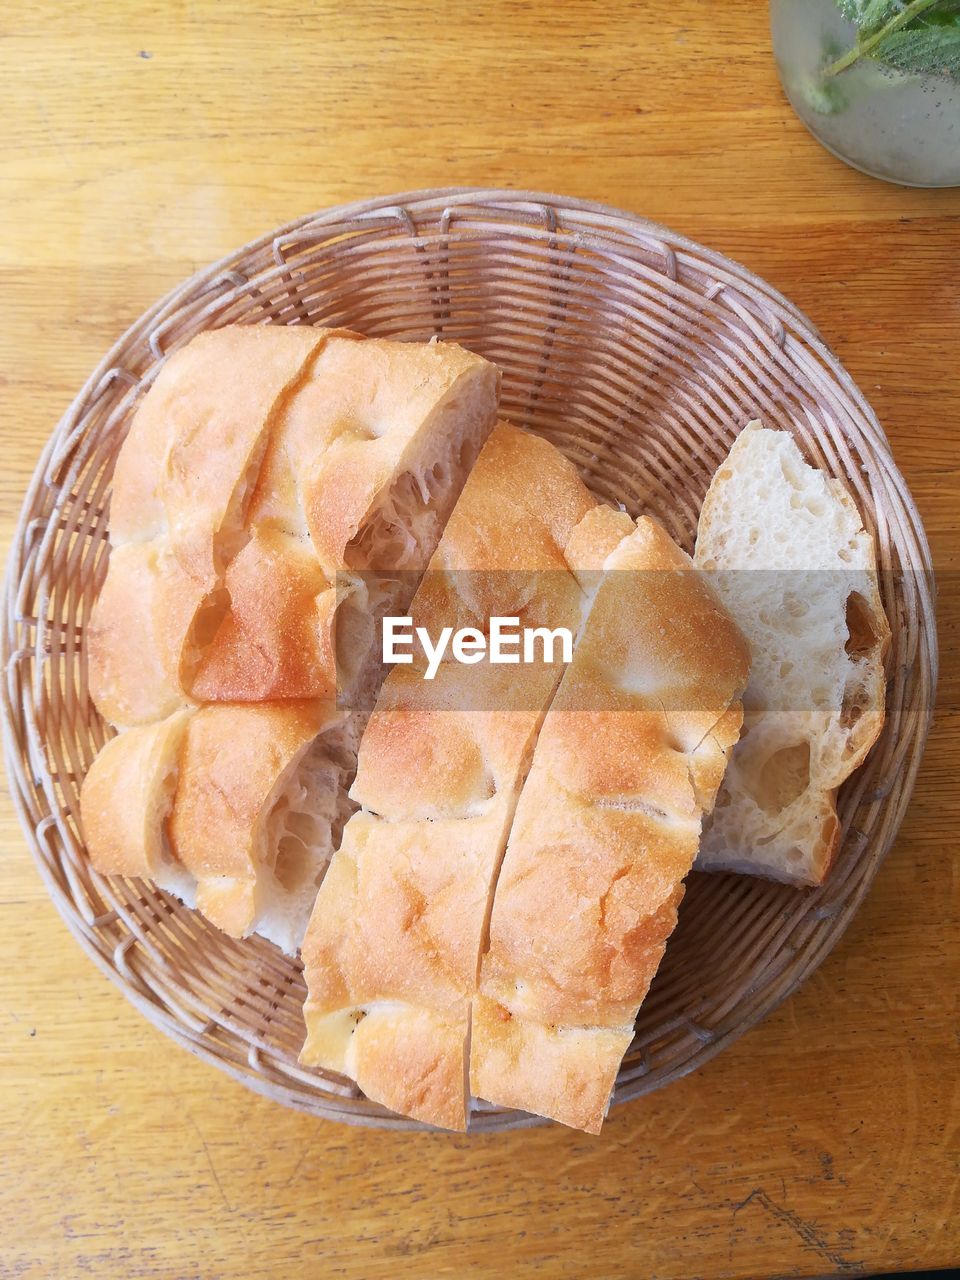 HIGH ANGLE VIEW OF BREAD IN BASKET